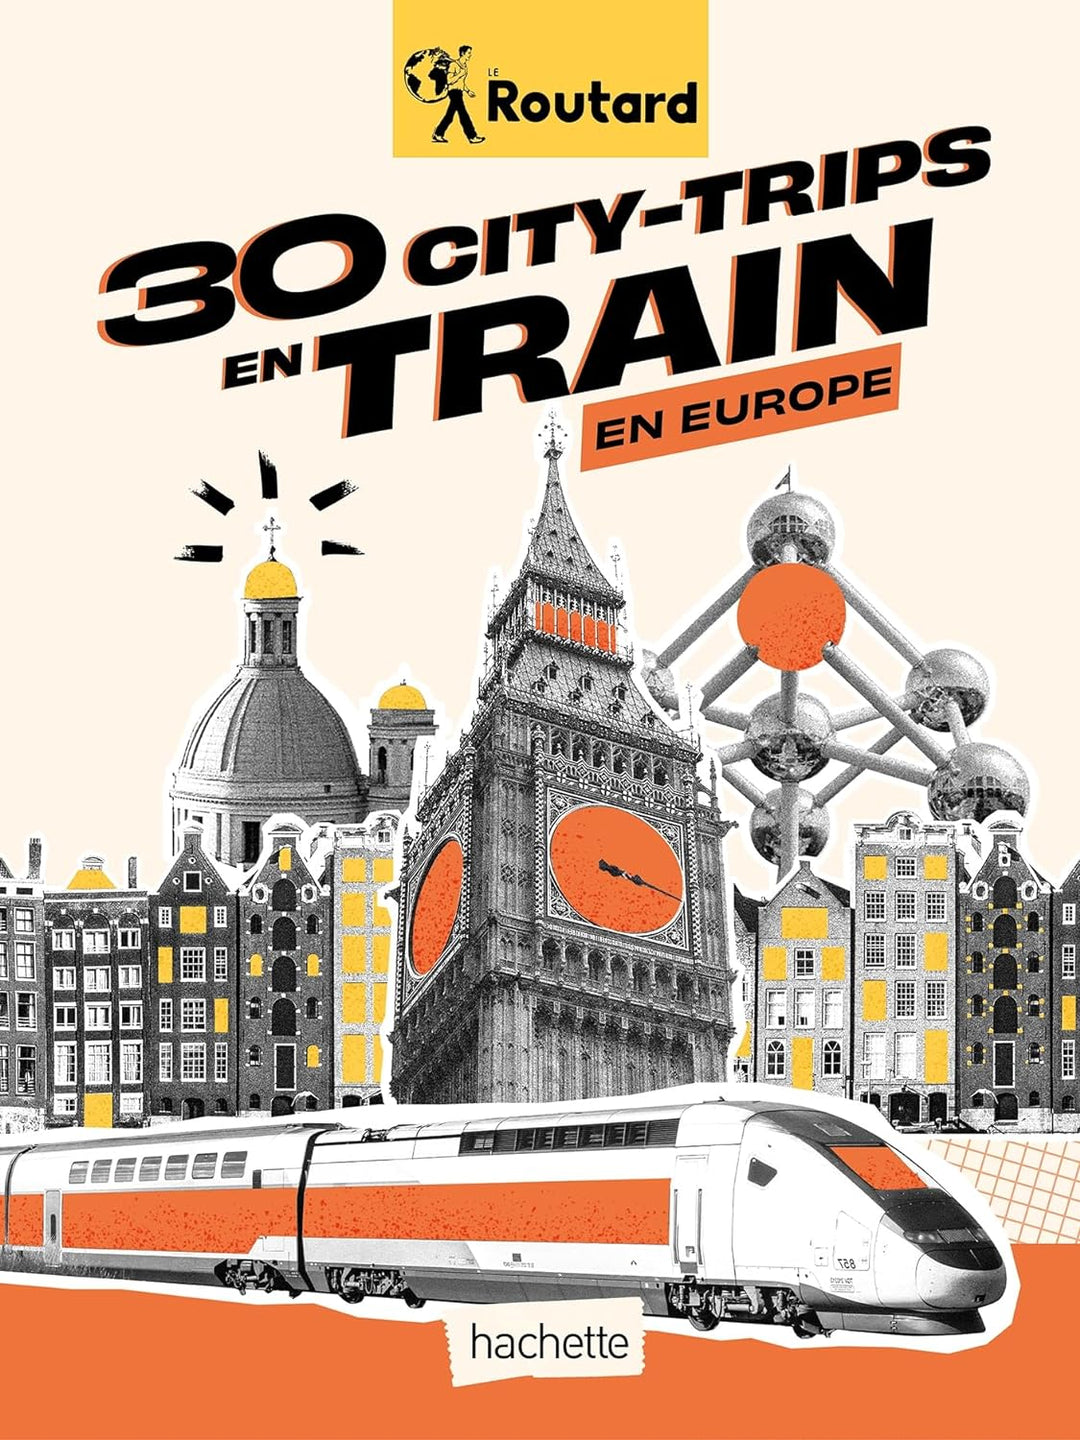 Routard's Guide - 30 city trips by train in Europe | Hatchet